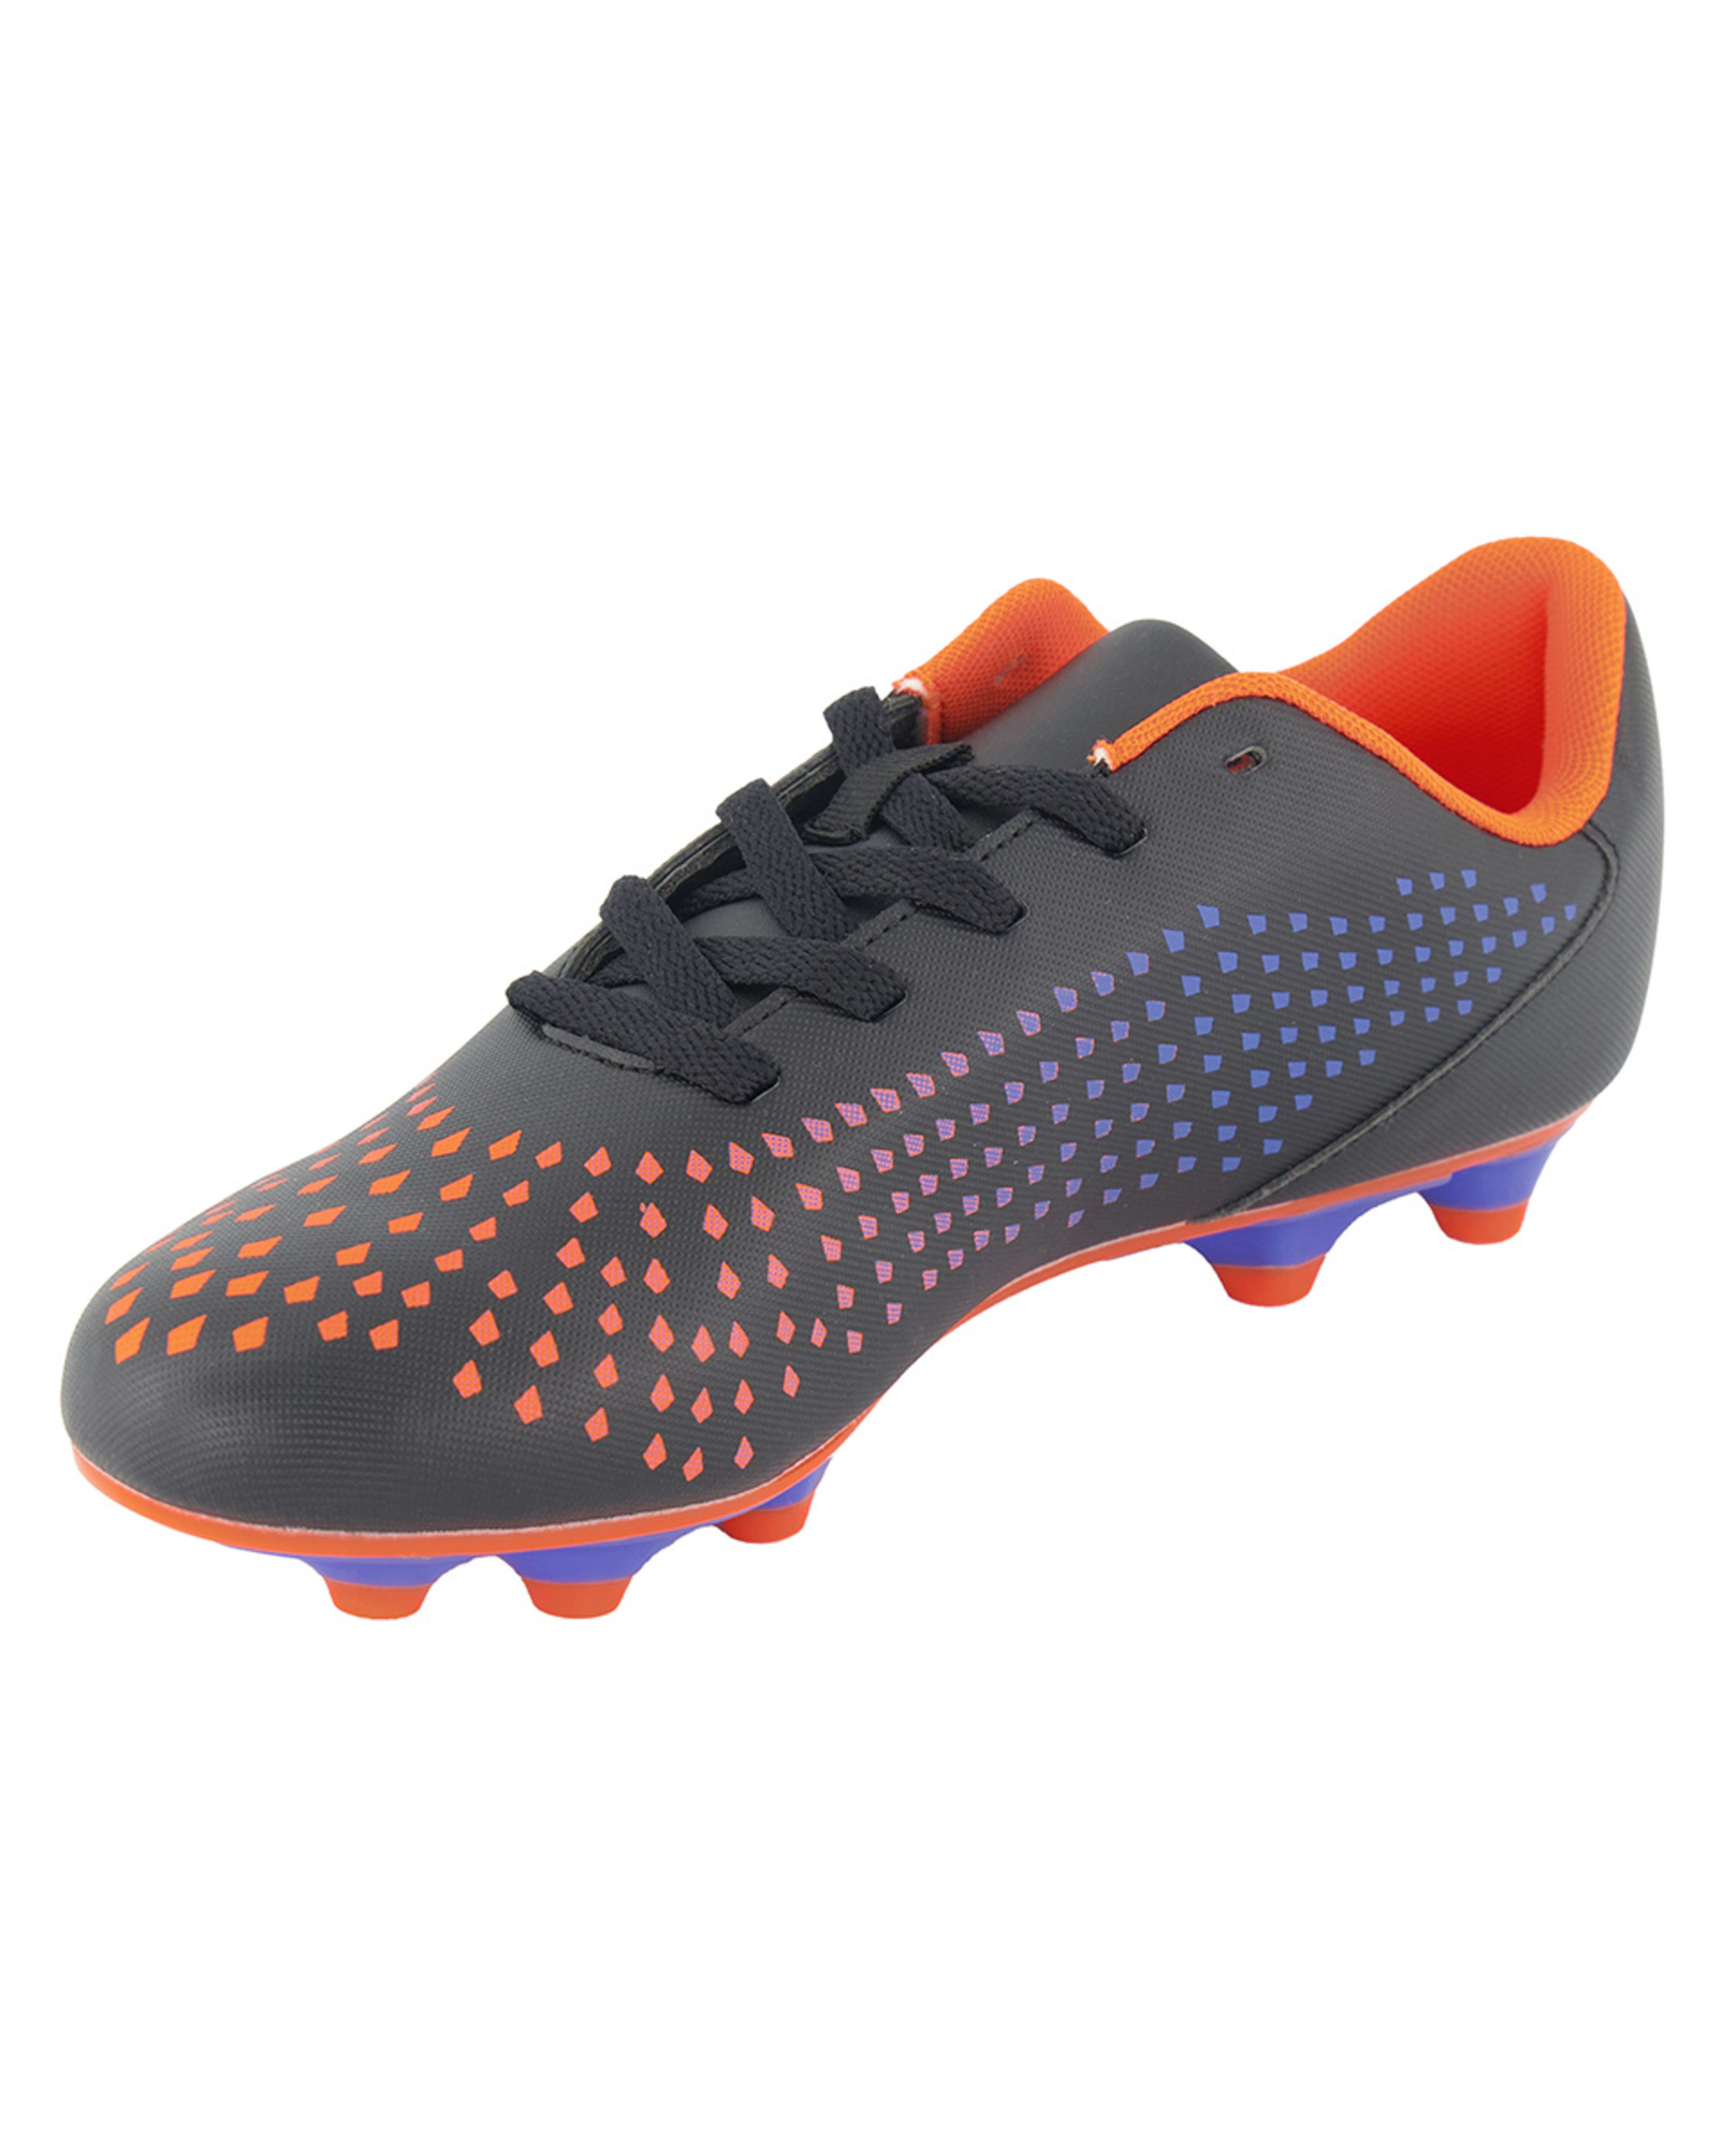 Active Kids Freddy Footy Boots - Kmart